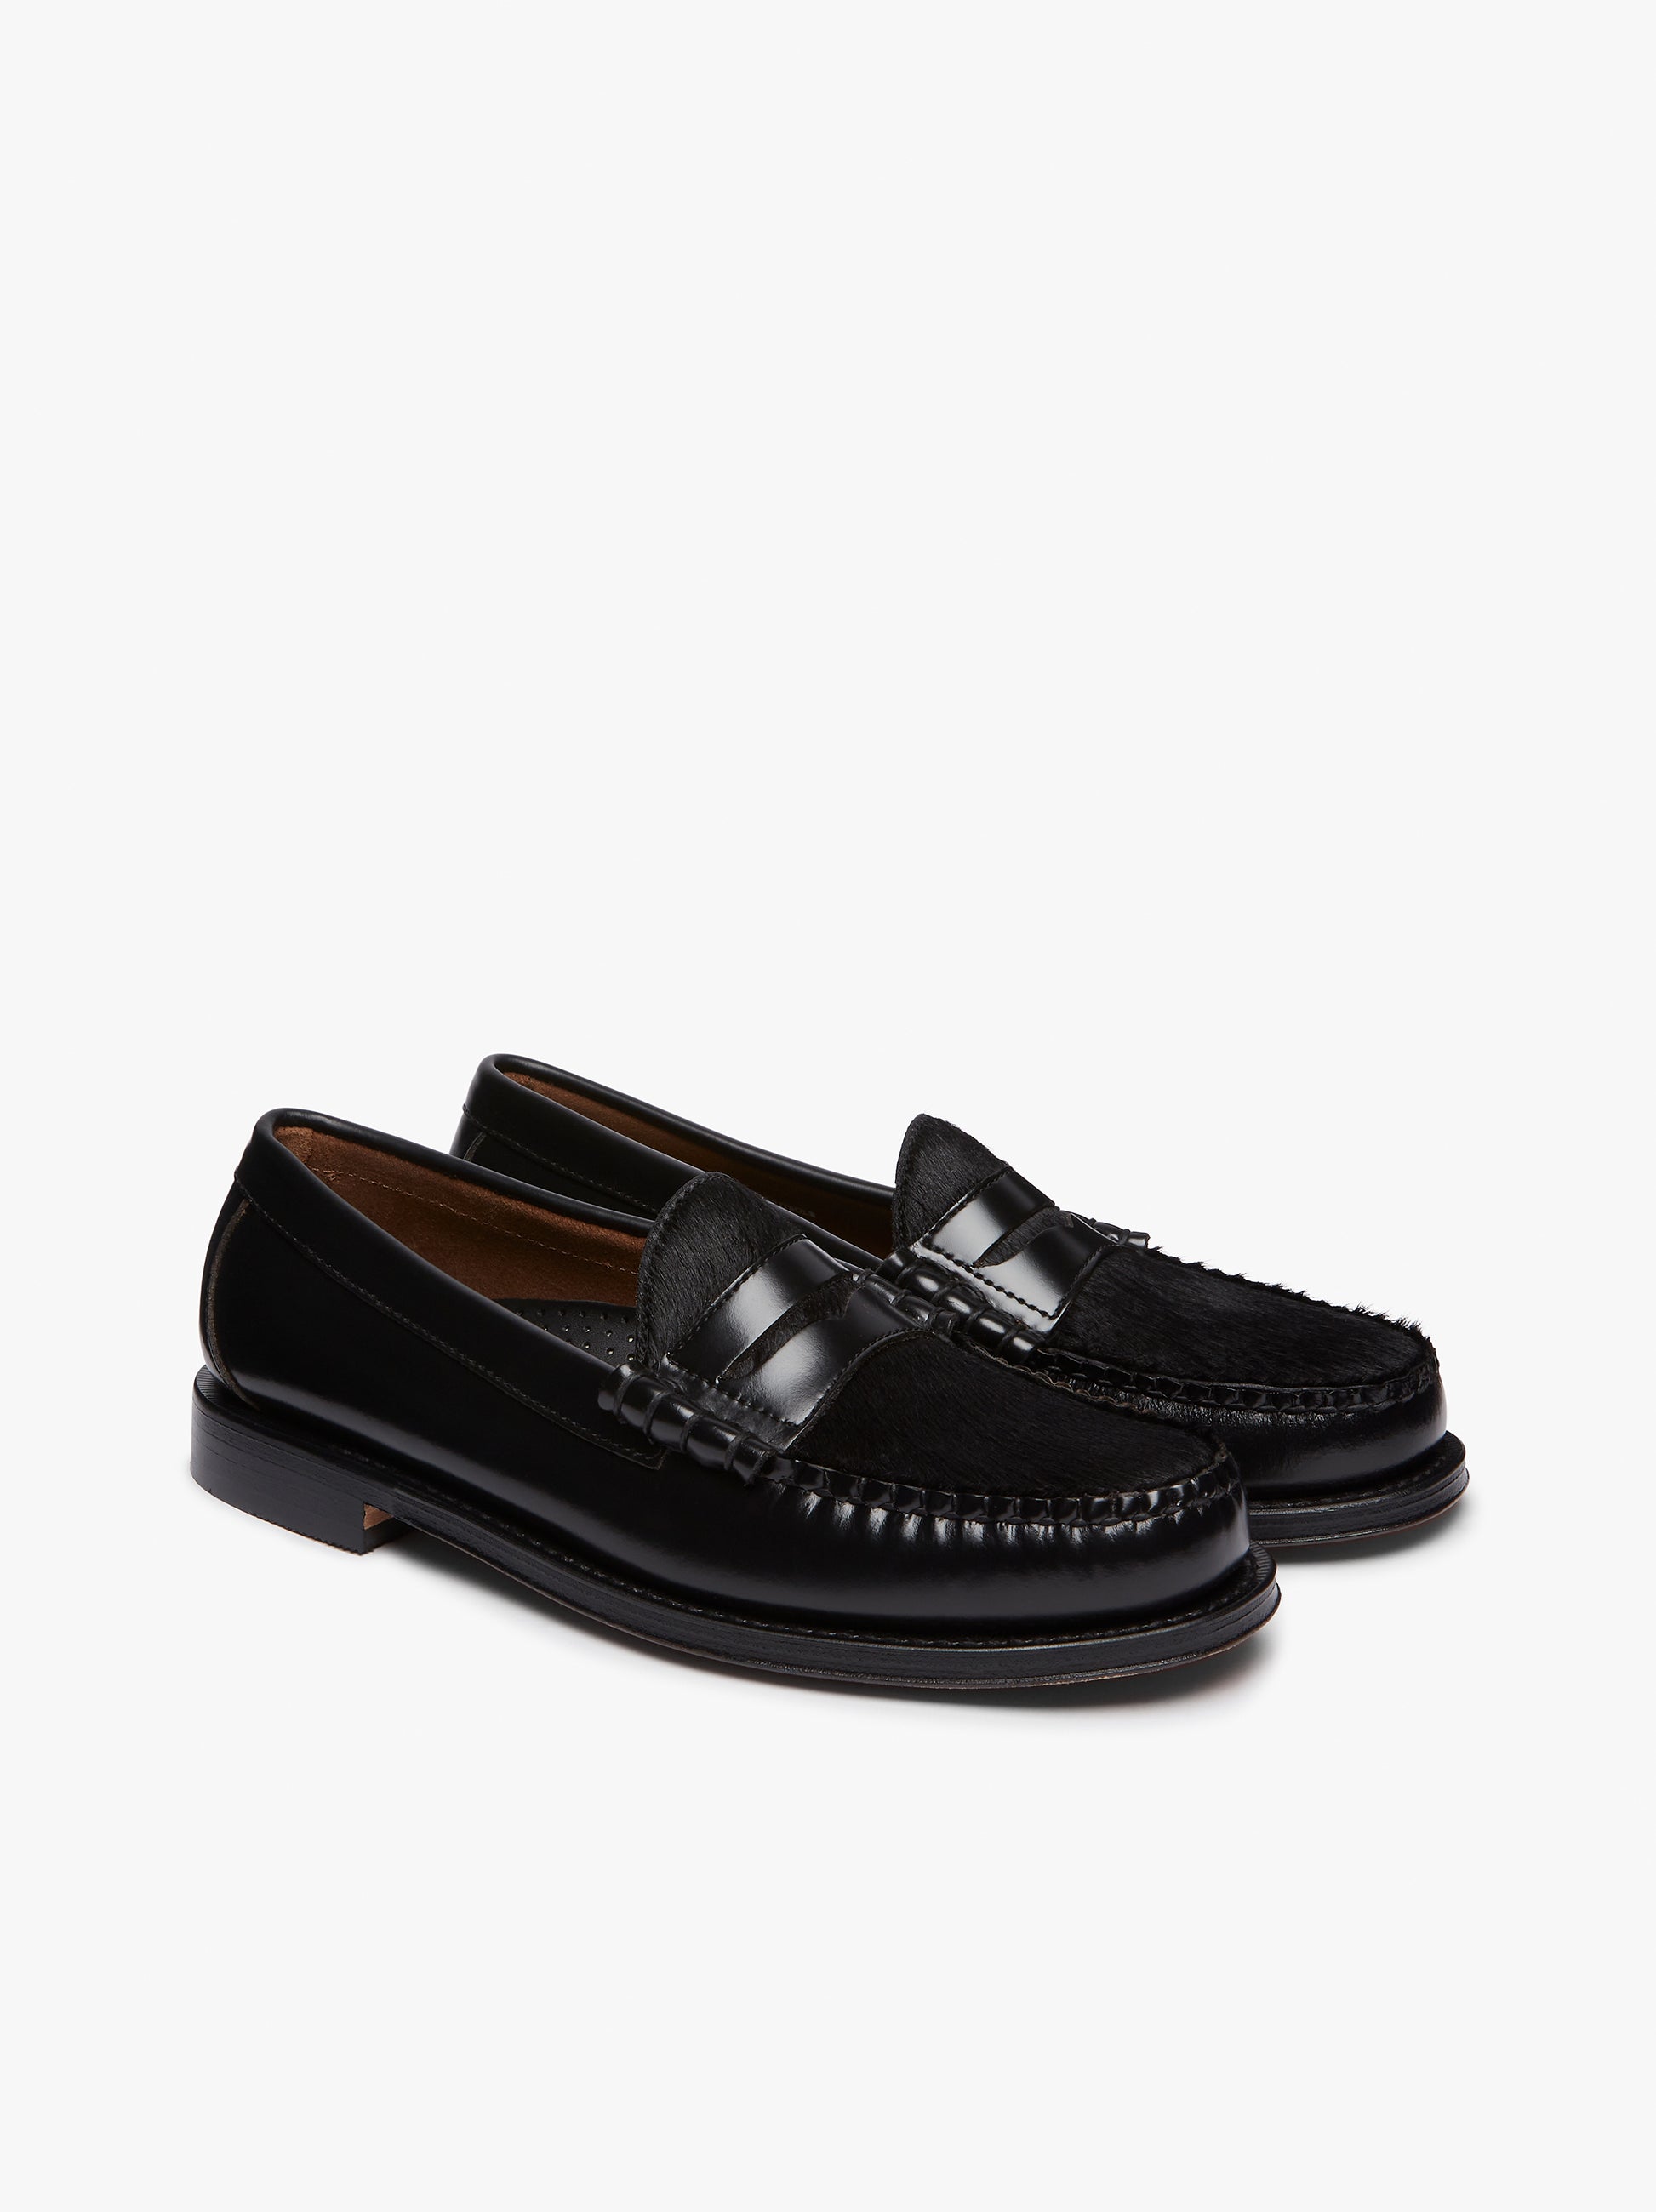 Weejuns Larson Penny Loafers Black Leather - G.H.BASS